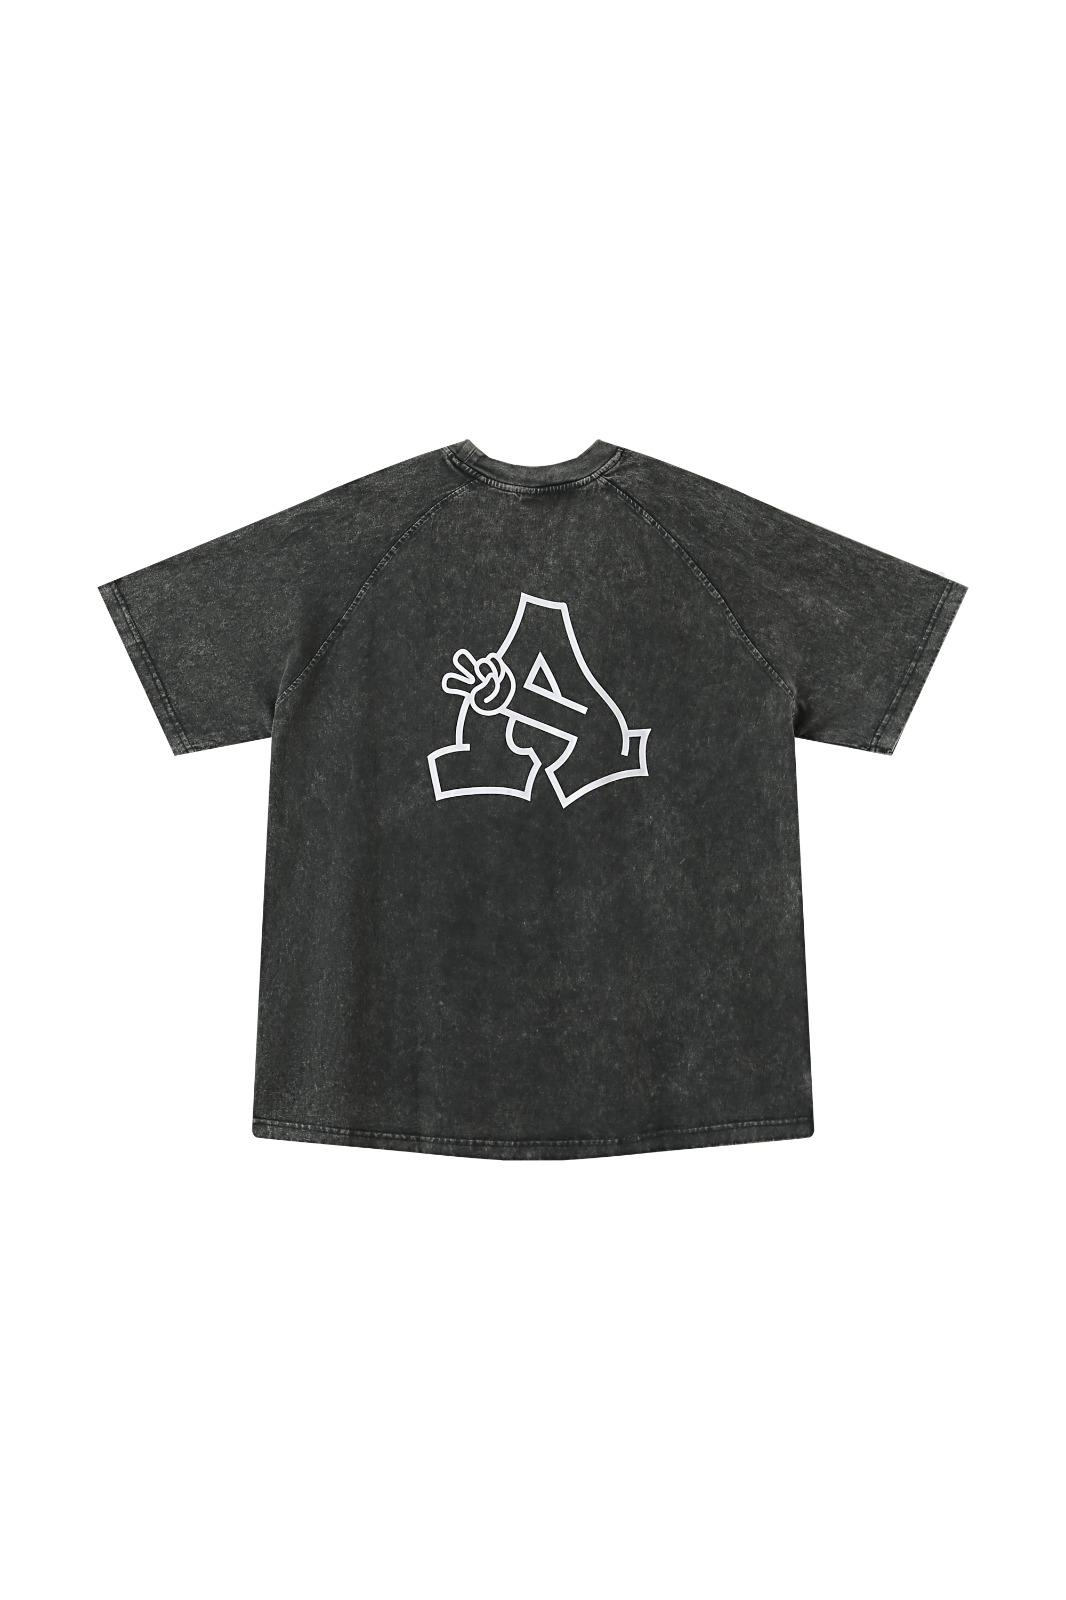 Aly Good Vibes - "Peace Out" Tee (Dark Grey)